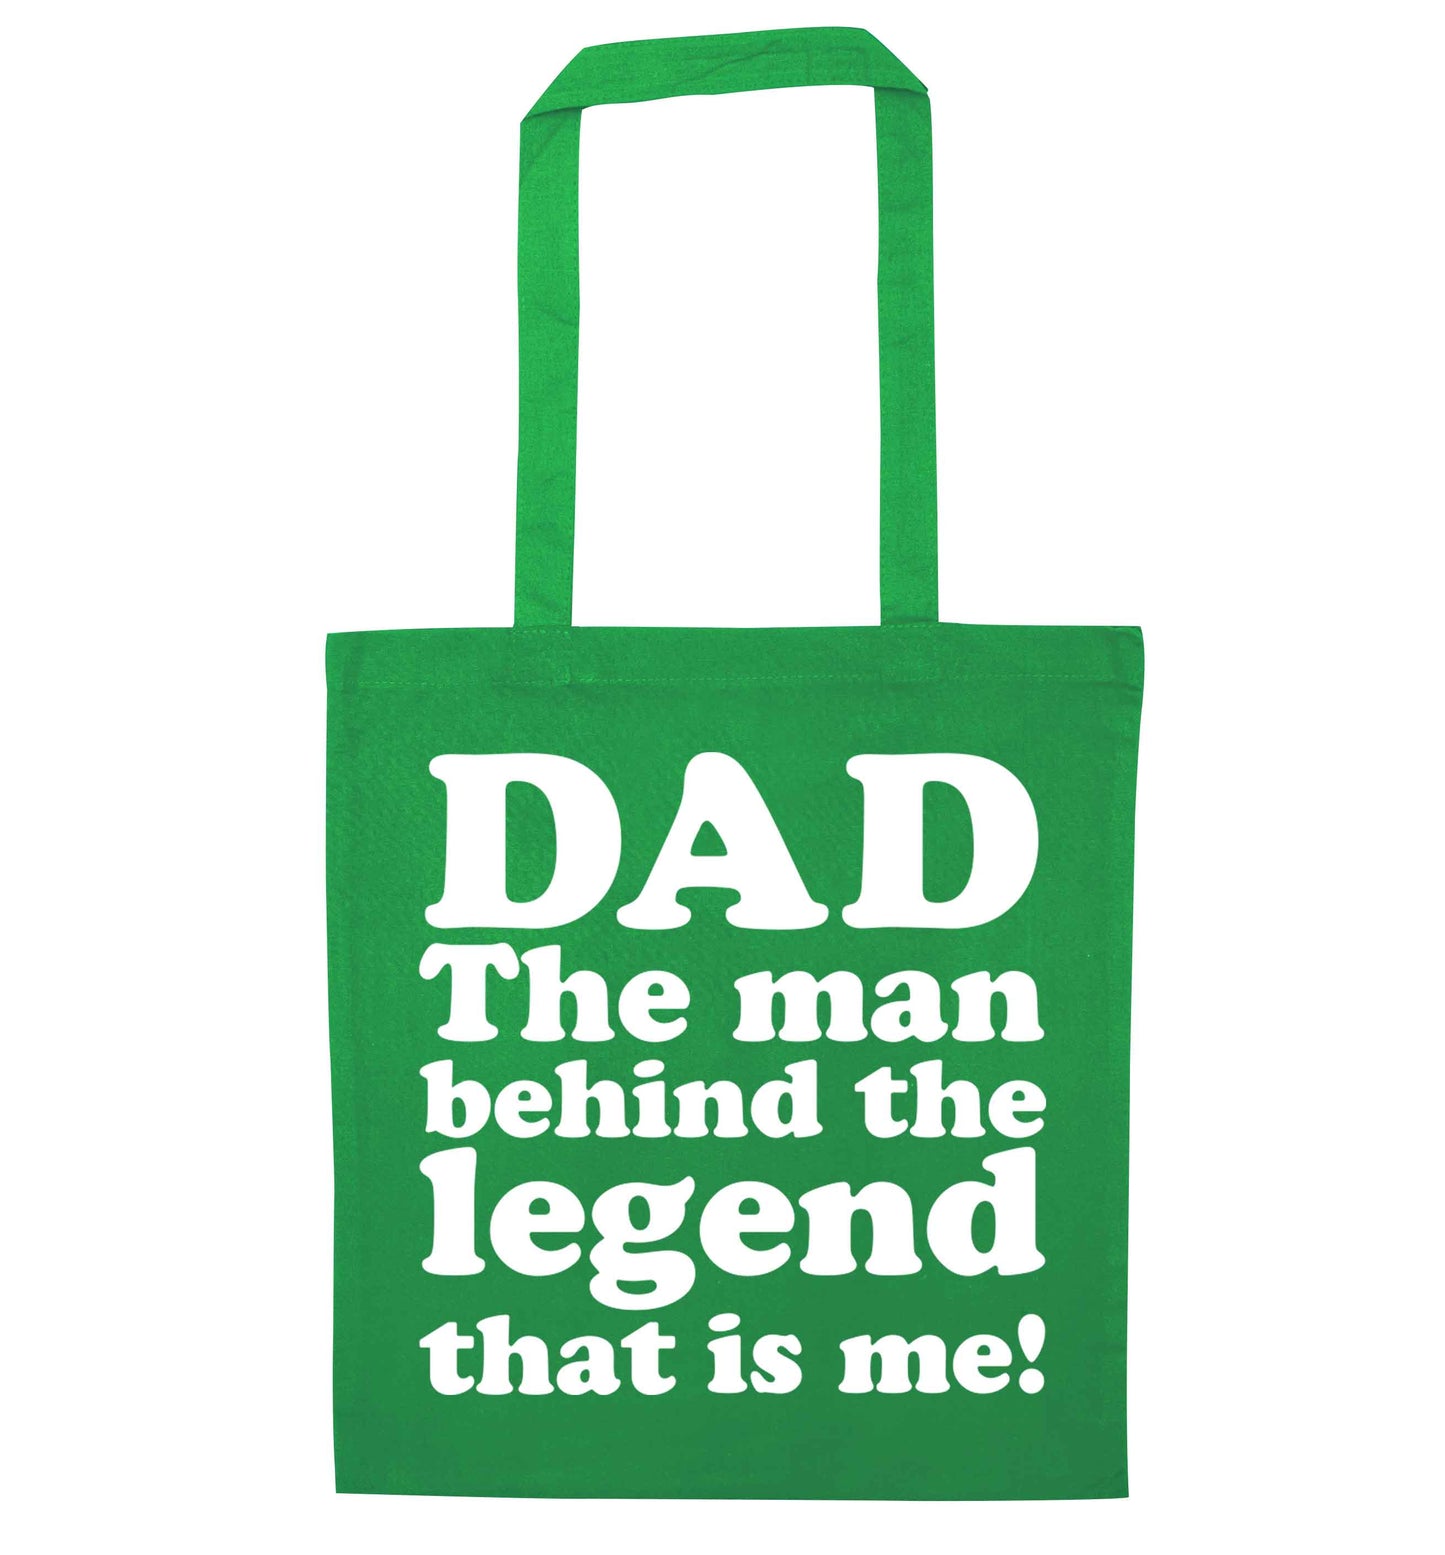 Dad the man behind the legend that is me green tote bag